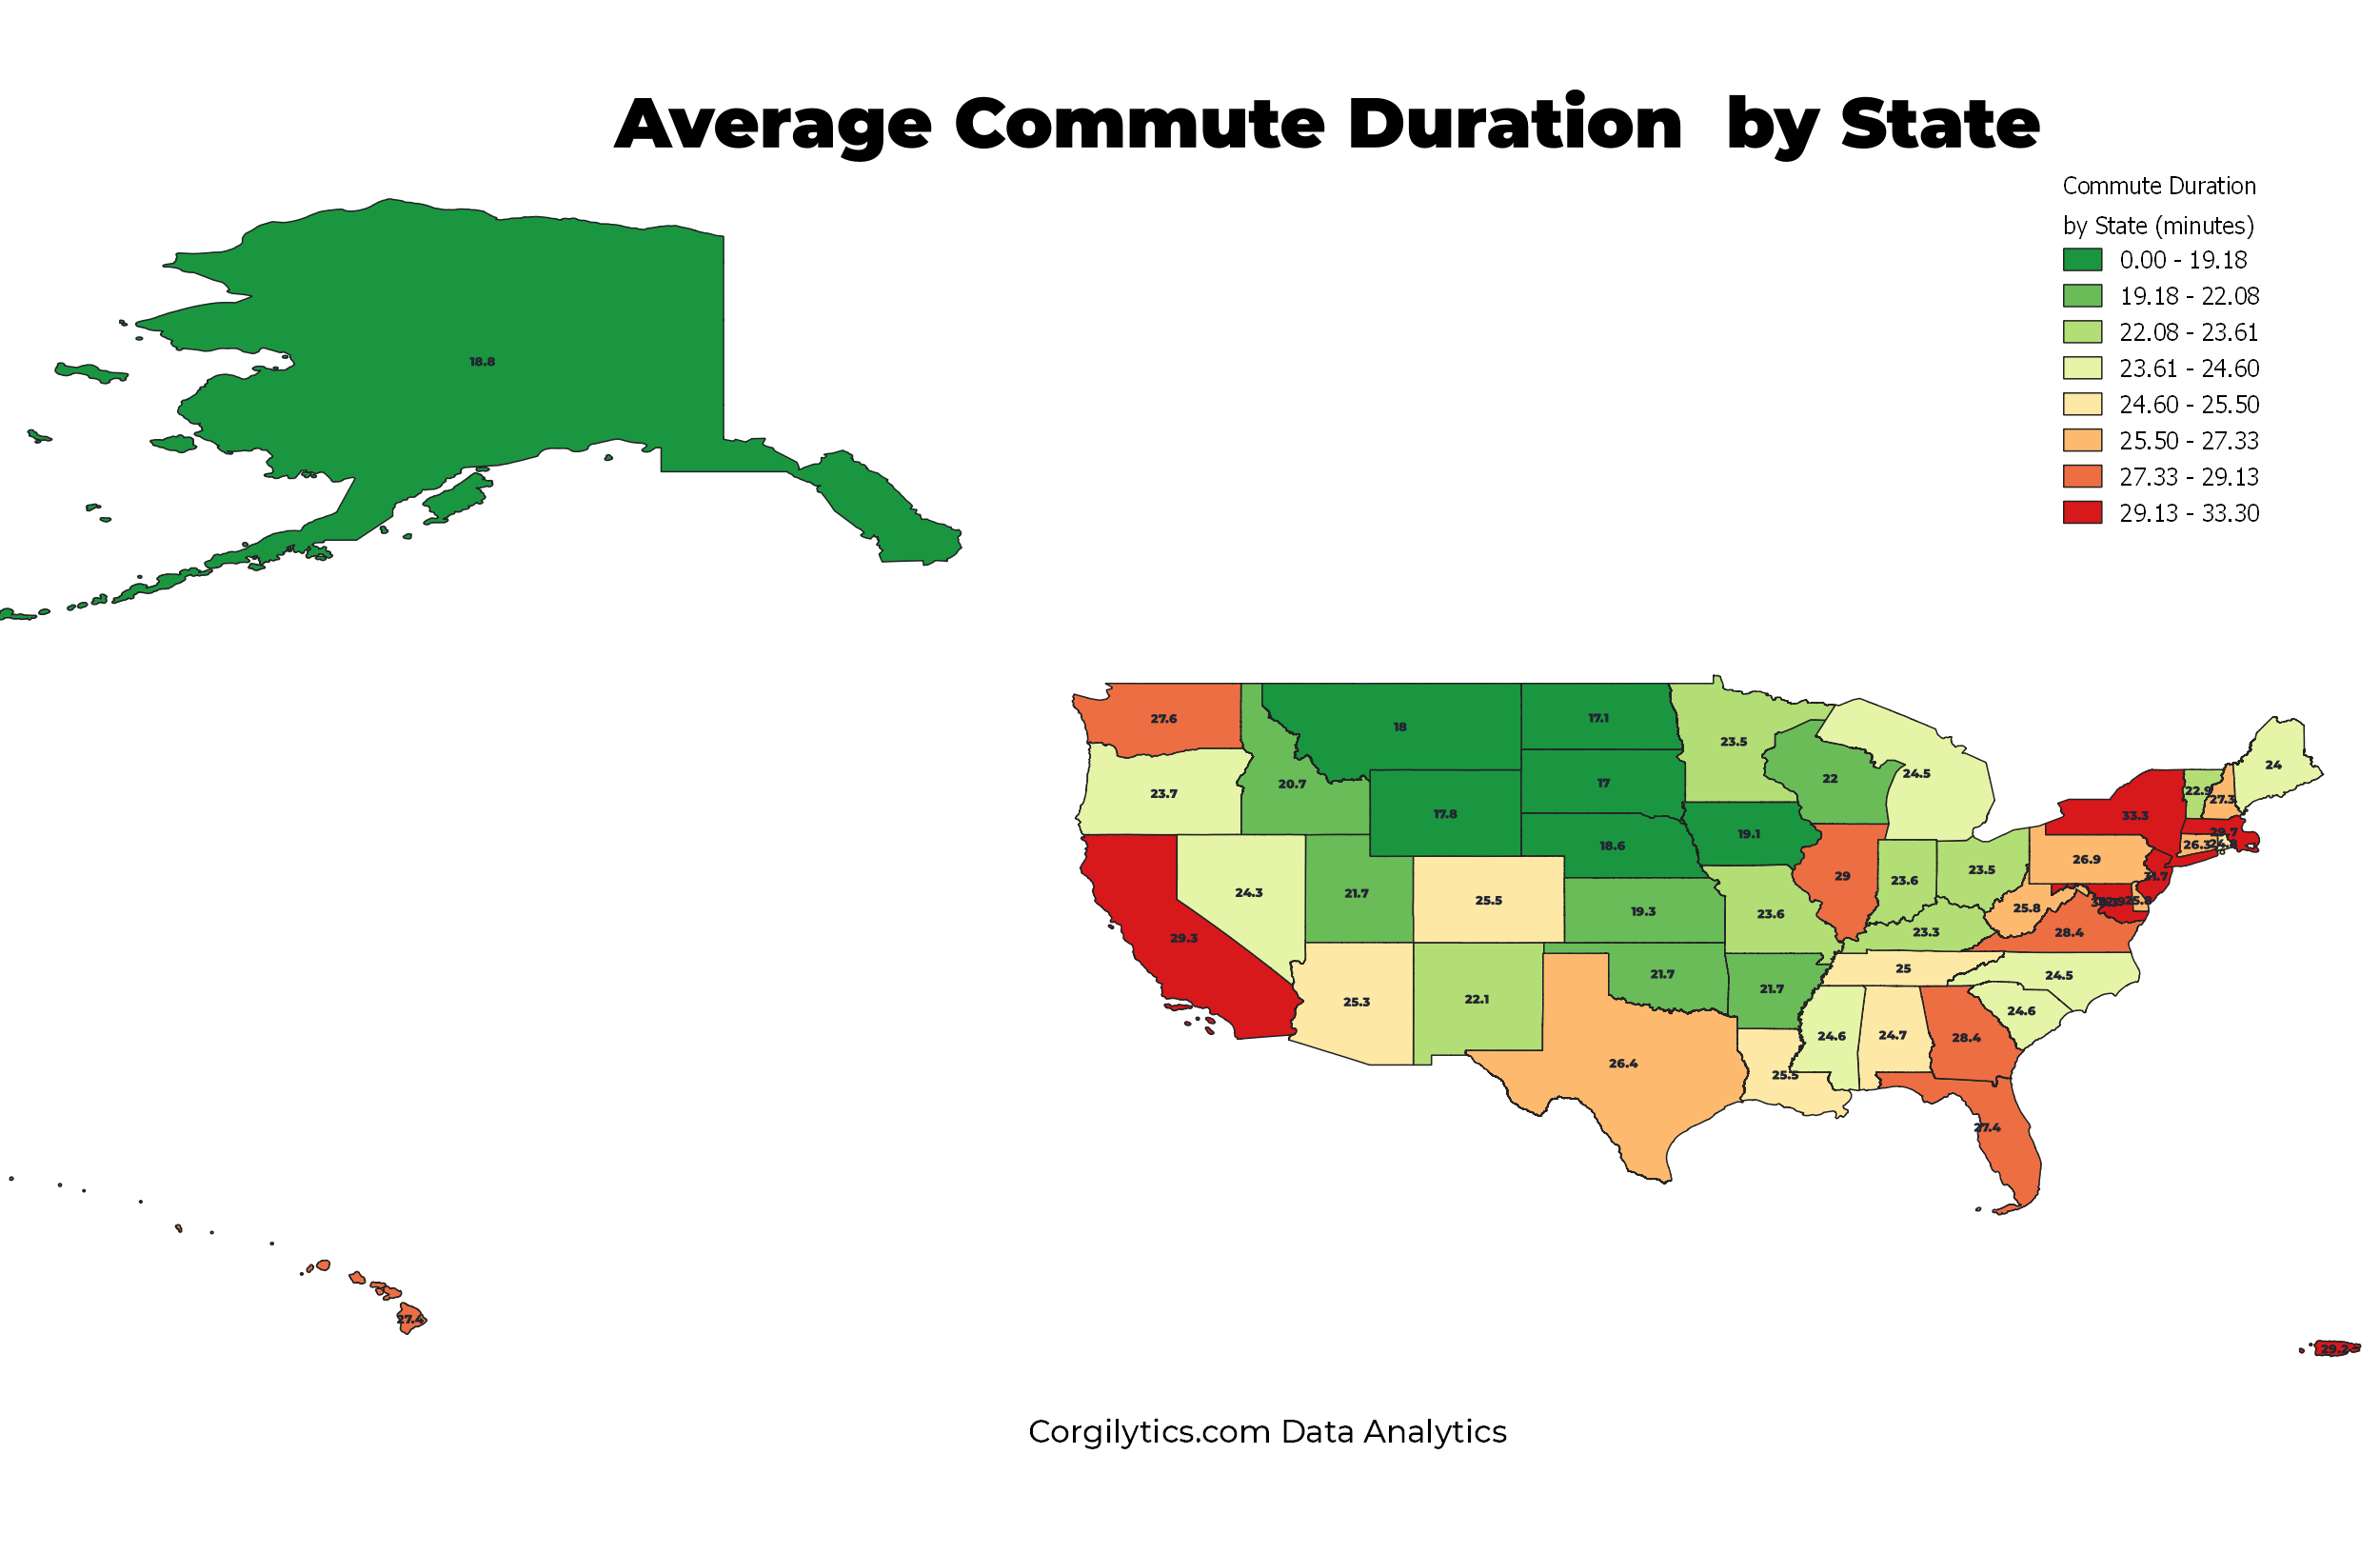 Image Depicting Chloropleth of Average Commute for Each US State